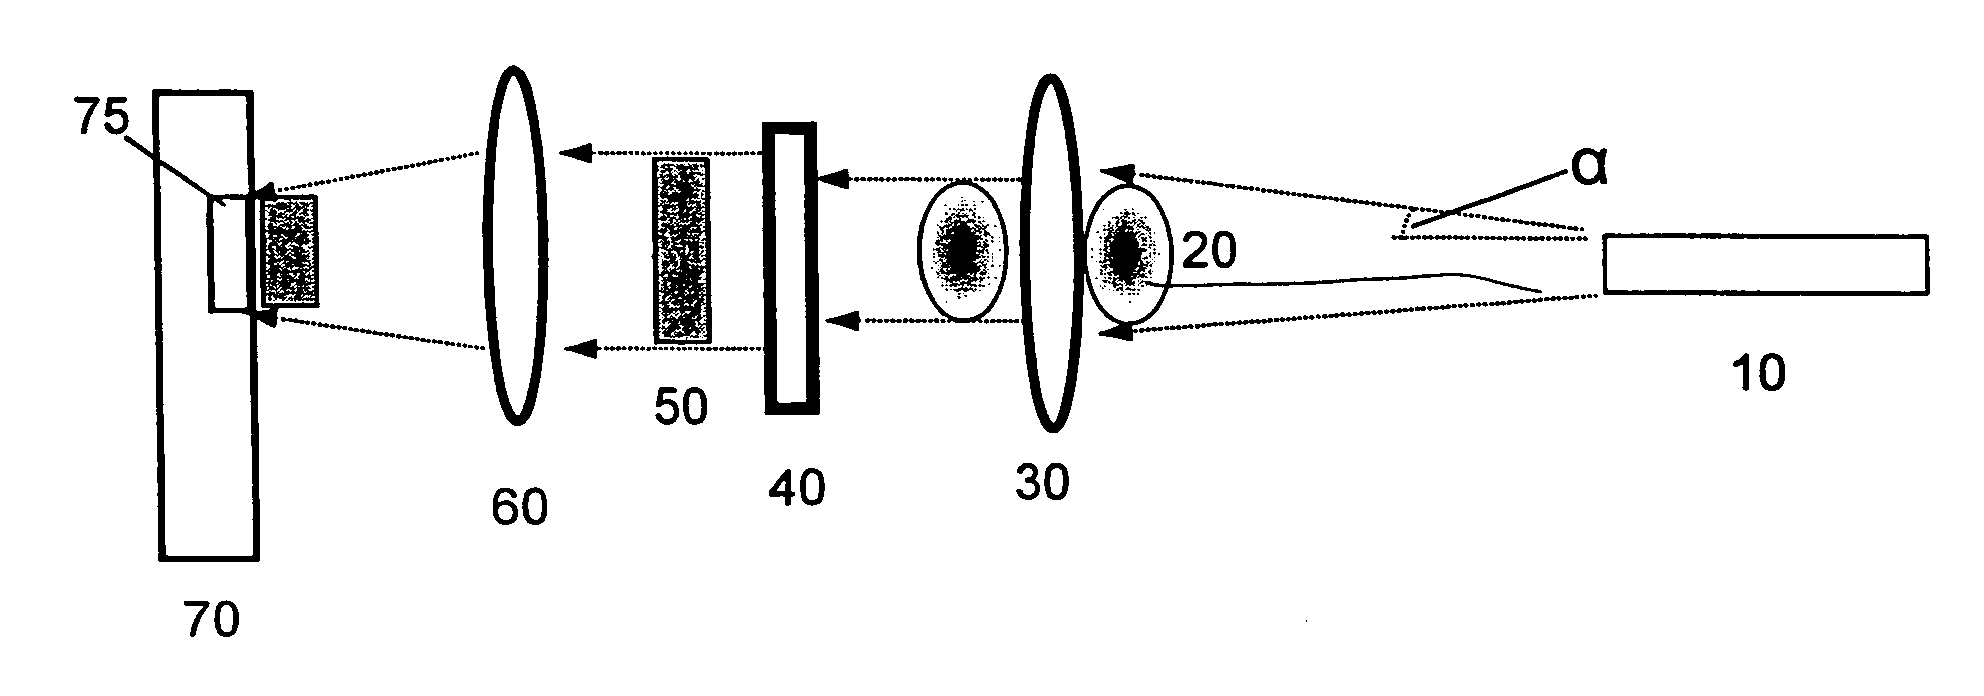 Shaped illumination geometry and intensity using a diffractive optical element